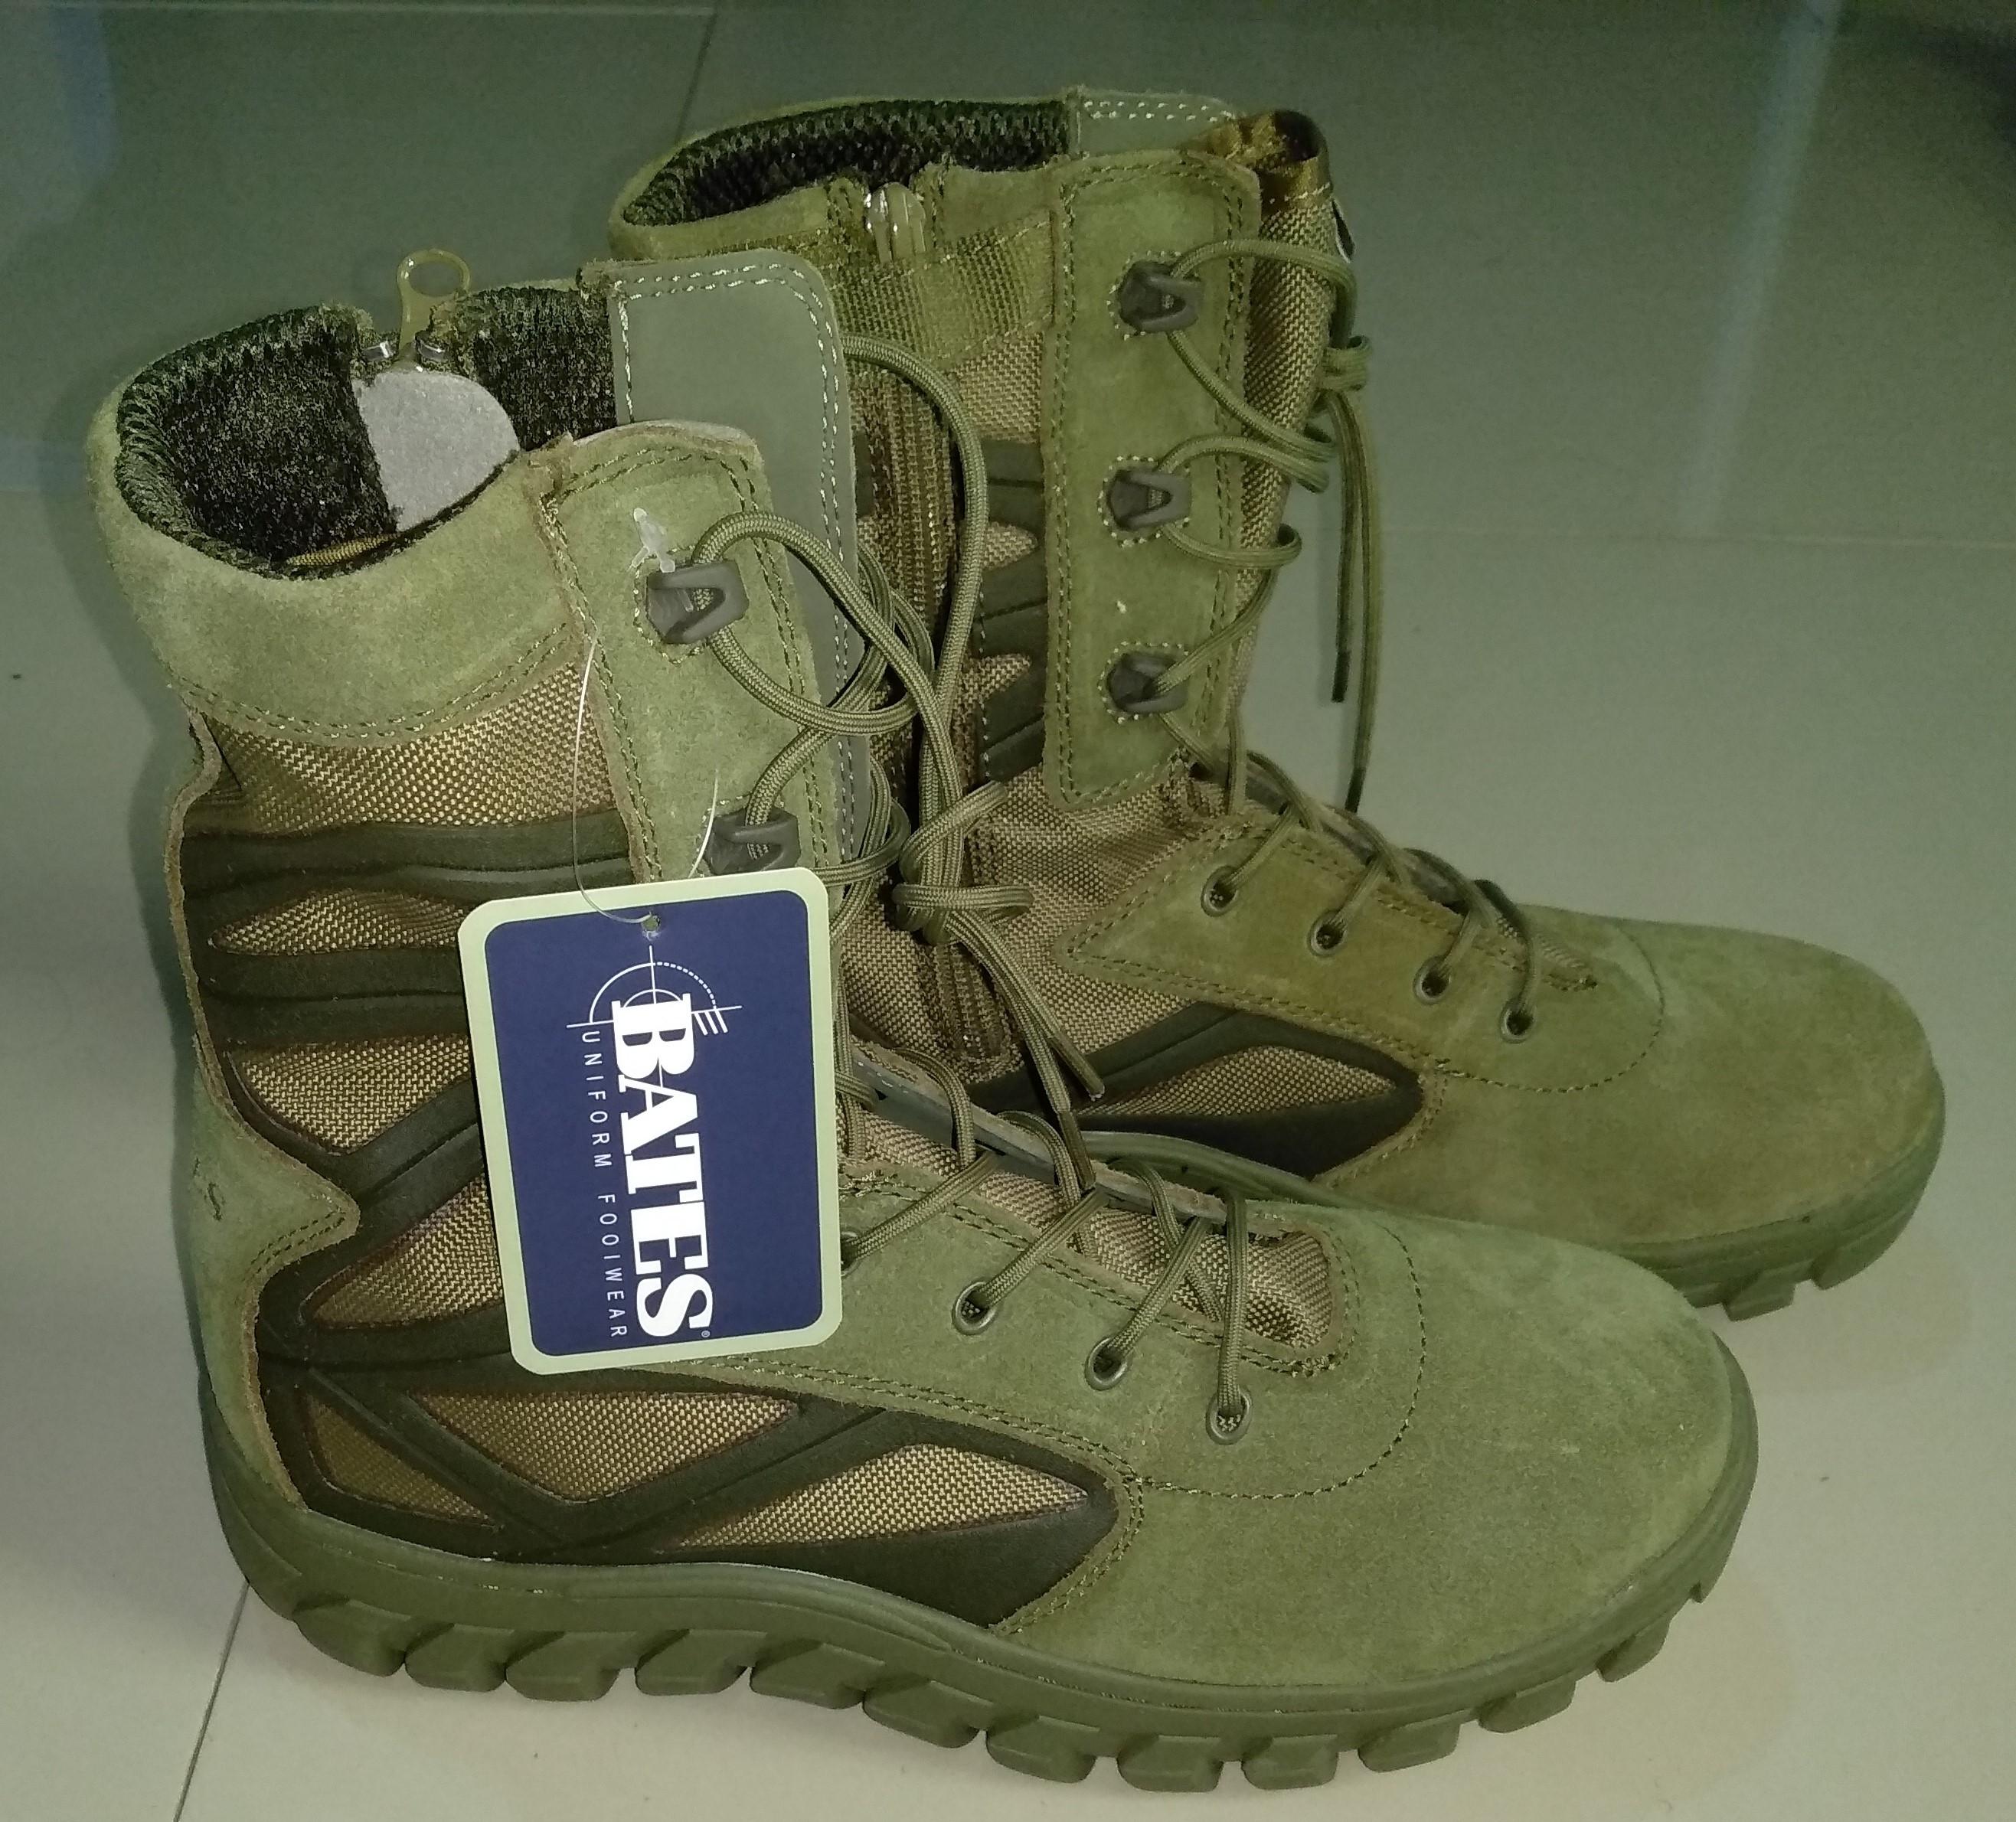 Bates tactical boots: Buy sell online 